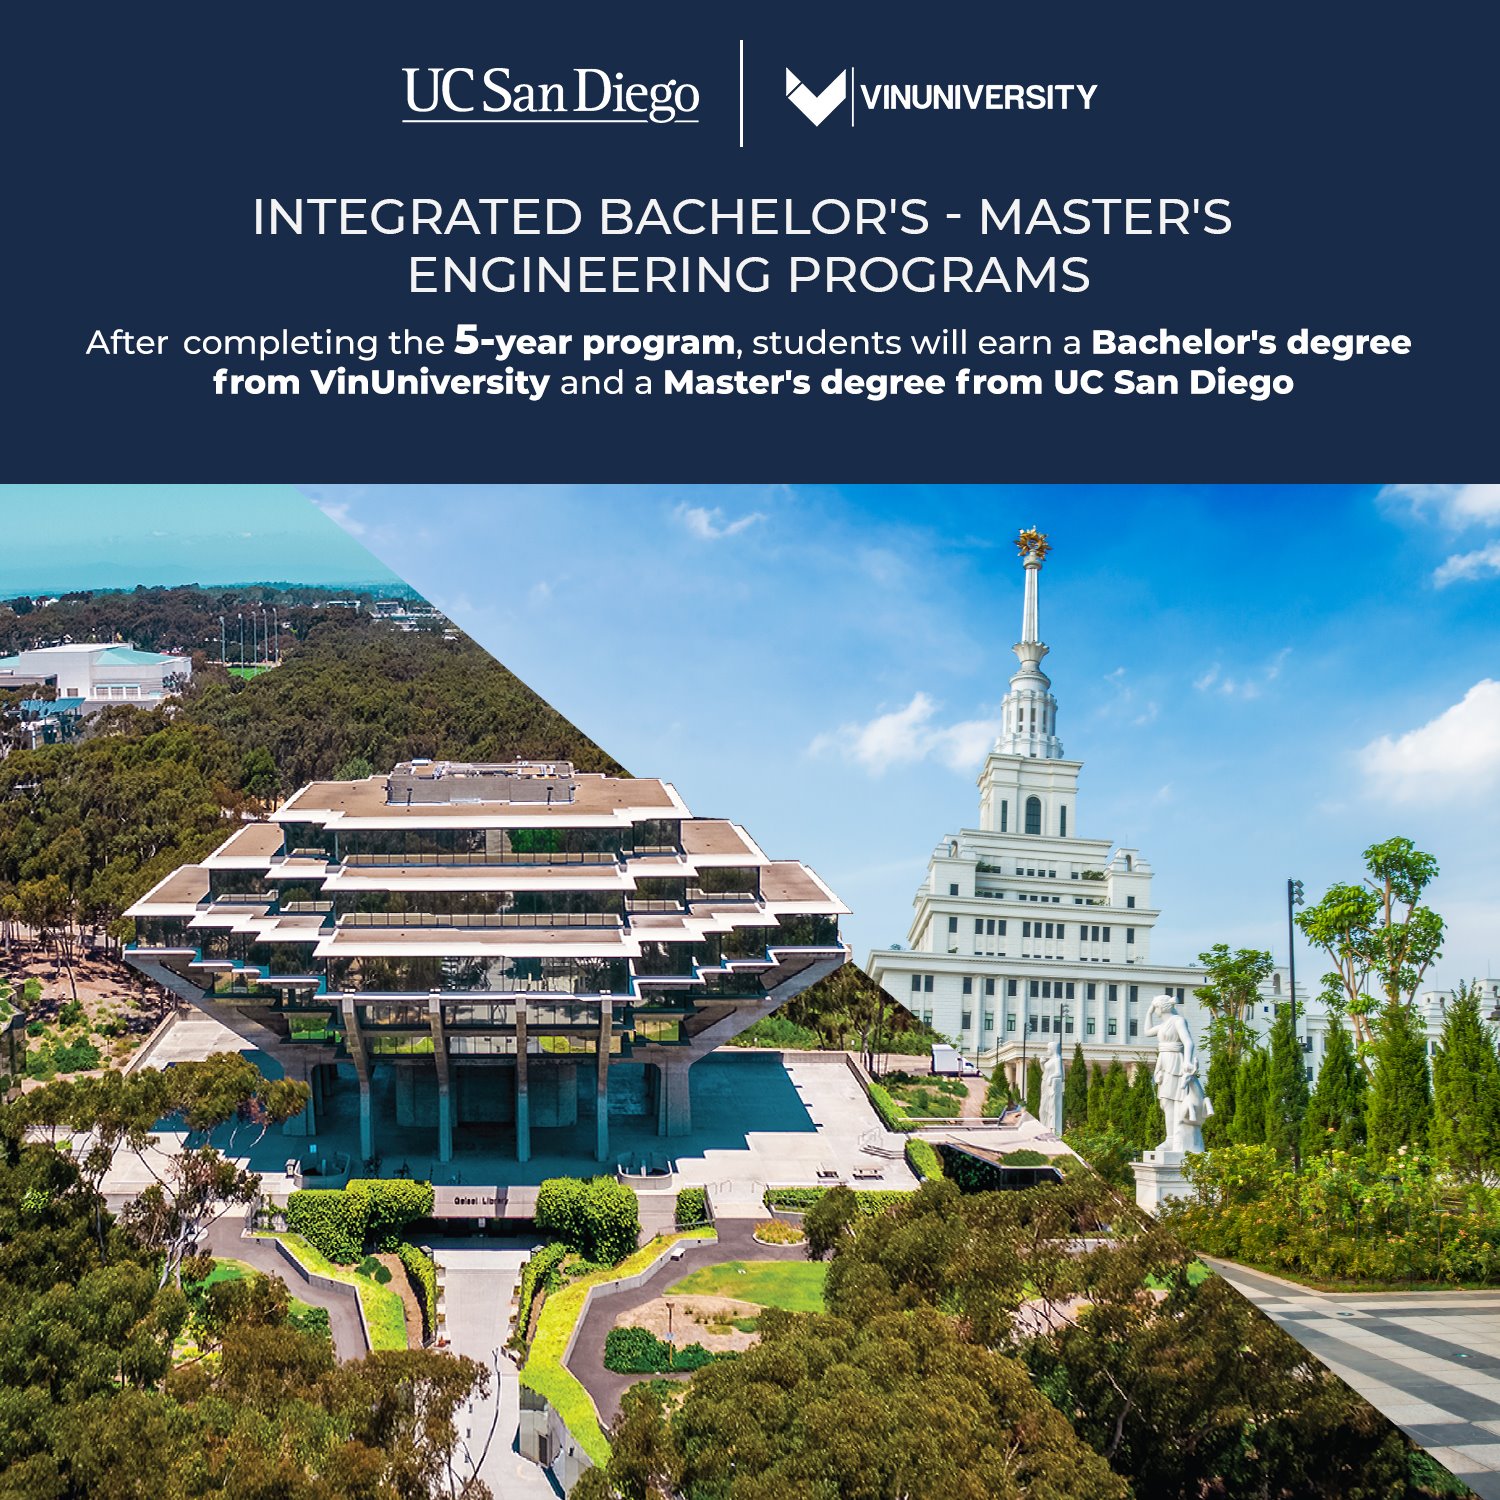 VinUniversity and University of California, San Diego to work on the